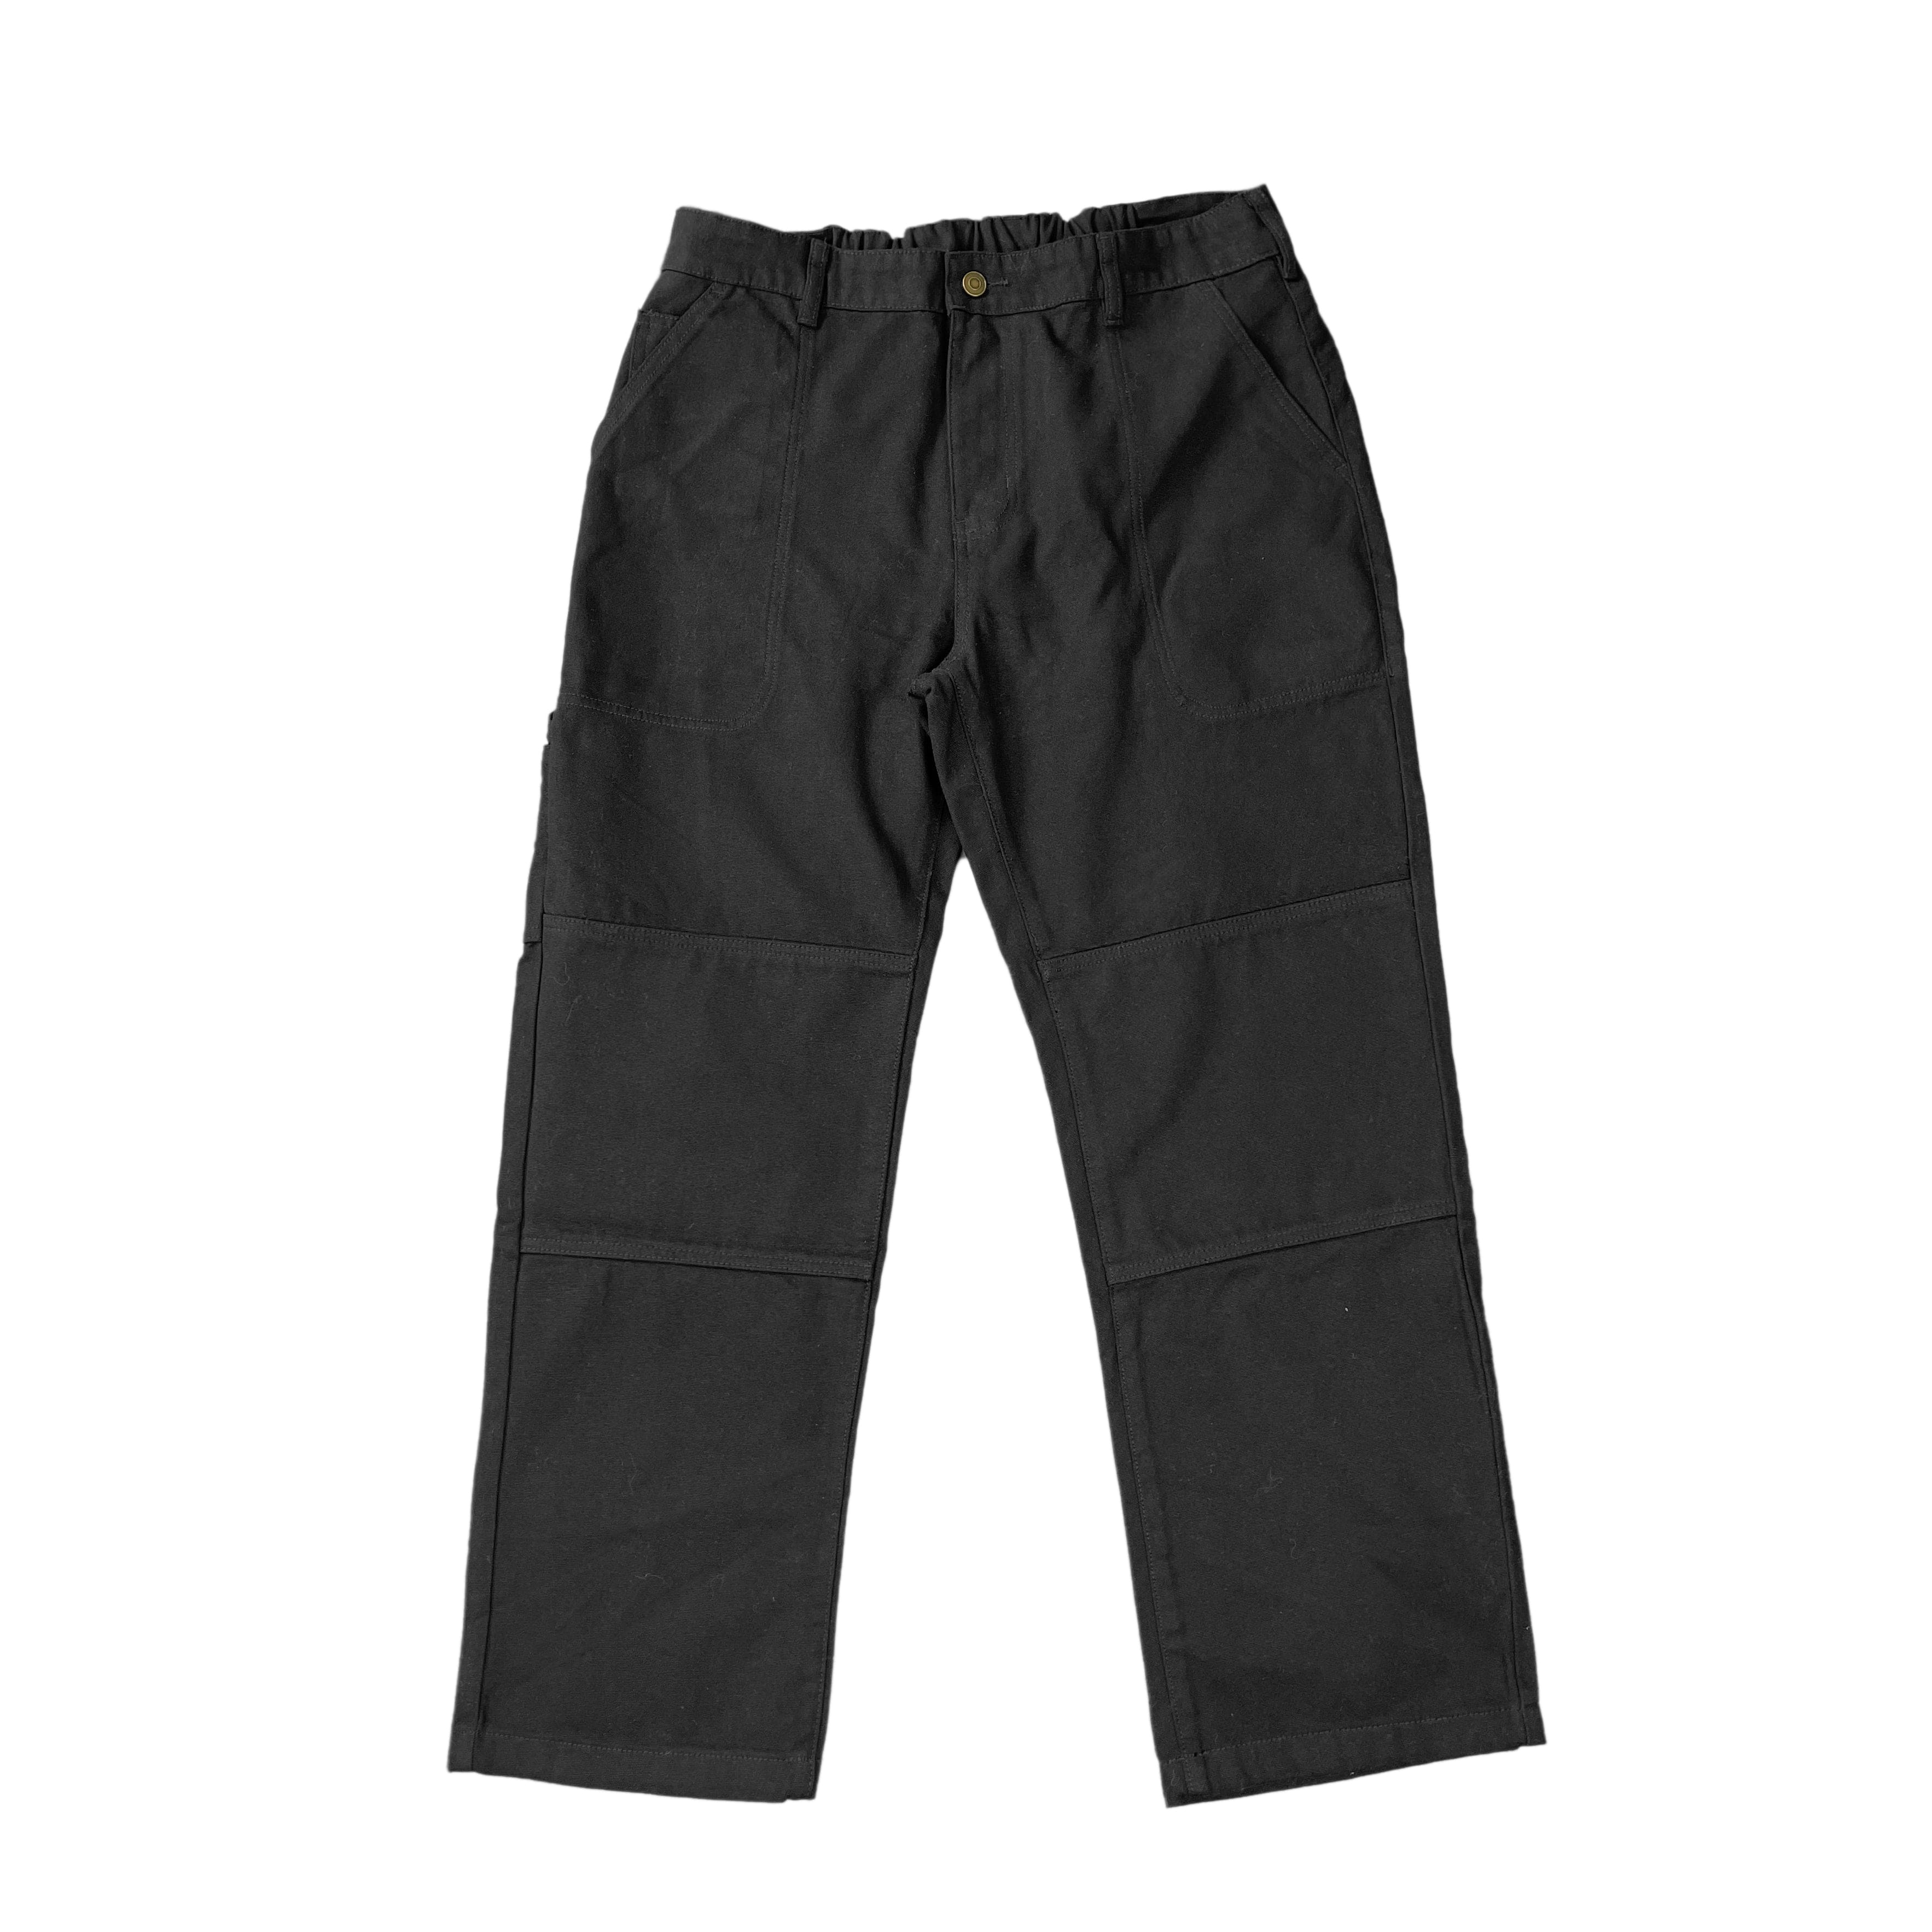 DOUBLE KNEE CANVAS PANTS - BLACK Regular fit Made of heavyweight 365 gsm cotton duck canvas Double layer front leg panels 2 side pockets & 2 back pockets Dual pockets at back & coin pocket YKK zip fly Elastic panel at back waistband VIC label flag at the back right pocket. 90s vintage workwear style